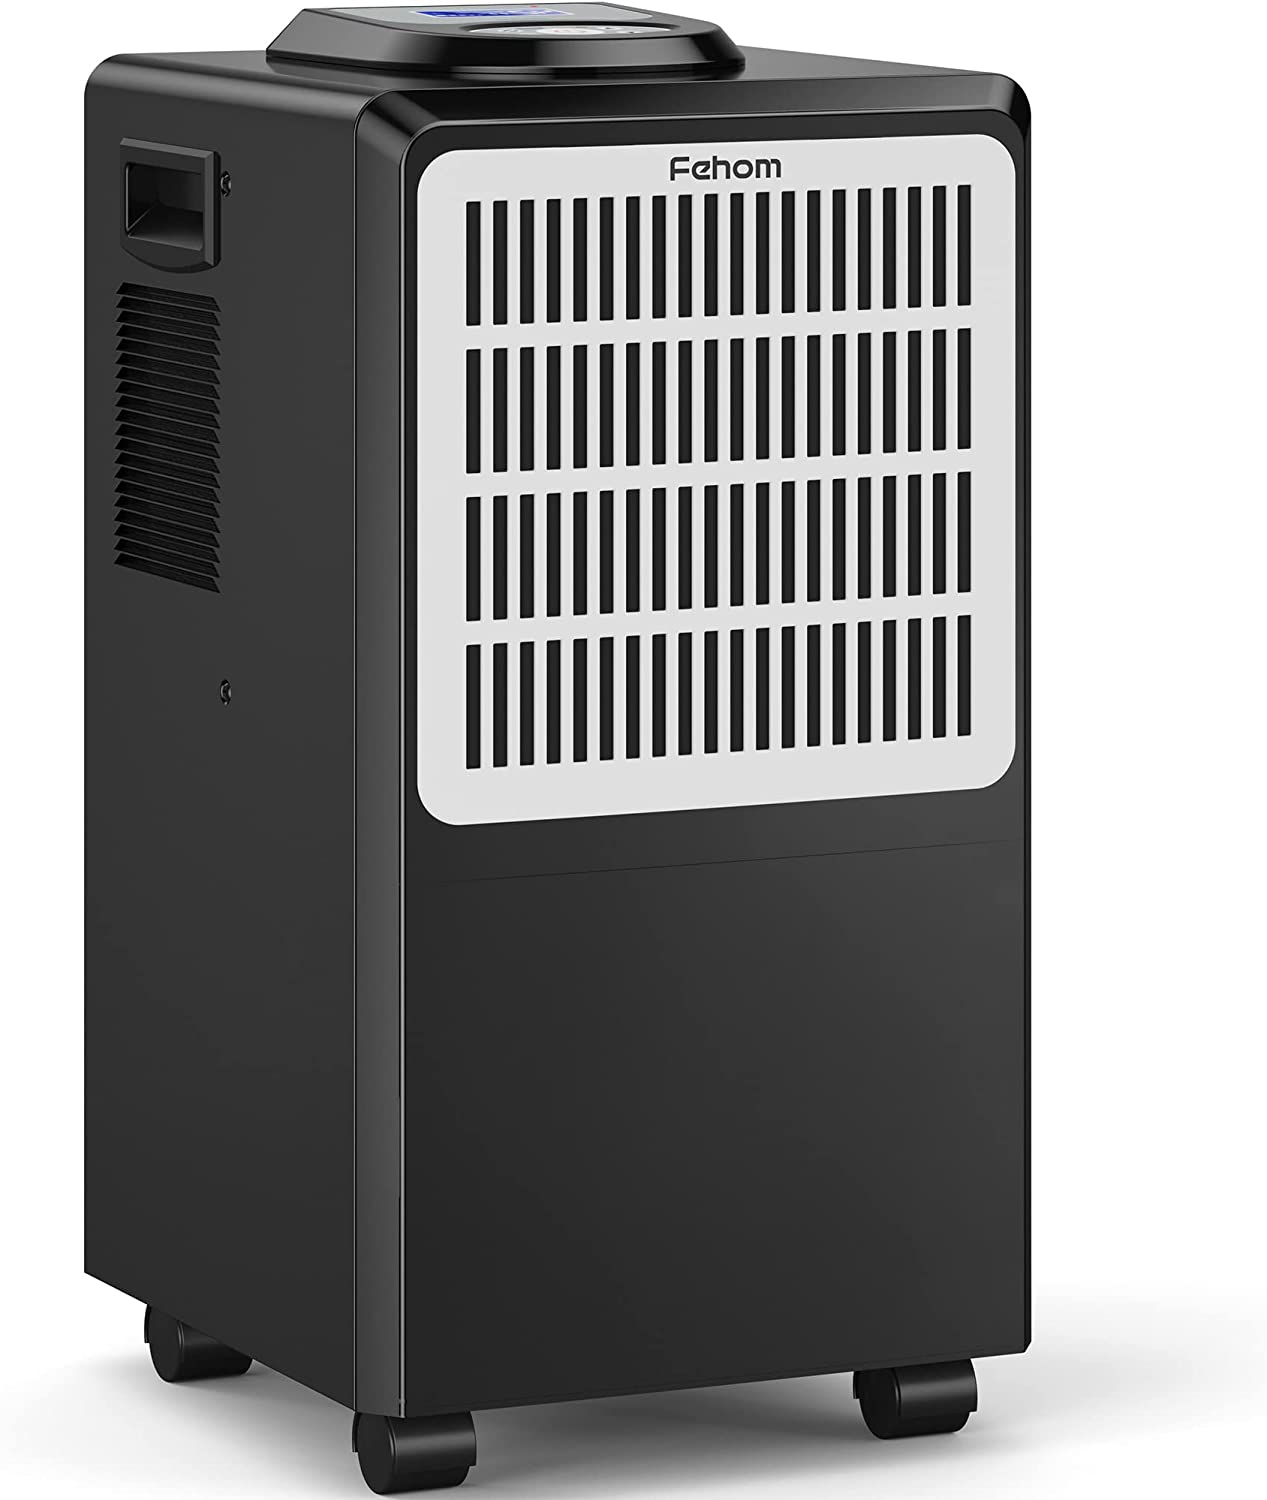 130 Pints Dehumidifiers with Drain Hose and 1.32 Gallons Water Tank - 6000 Sq. Ft Dehumidifier with 24 Hr Timer and Clean Washable Filter, Perfect for Large Basements, Bathroom, Bedroom (Model: YDA-858F)